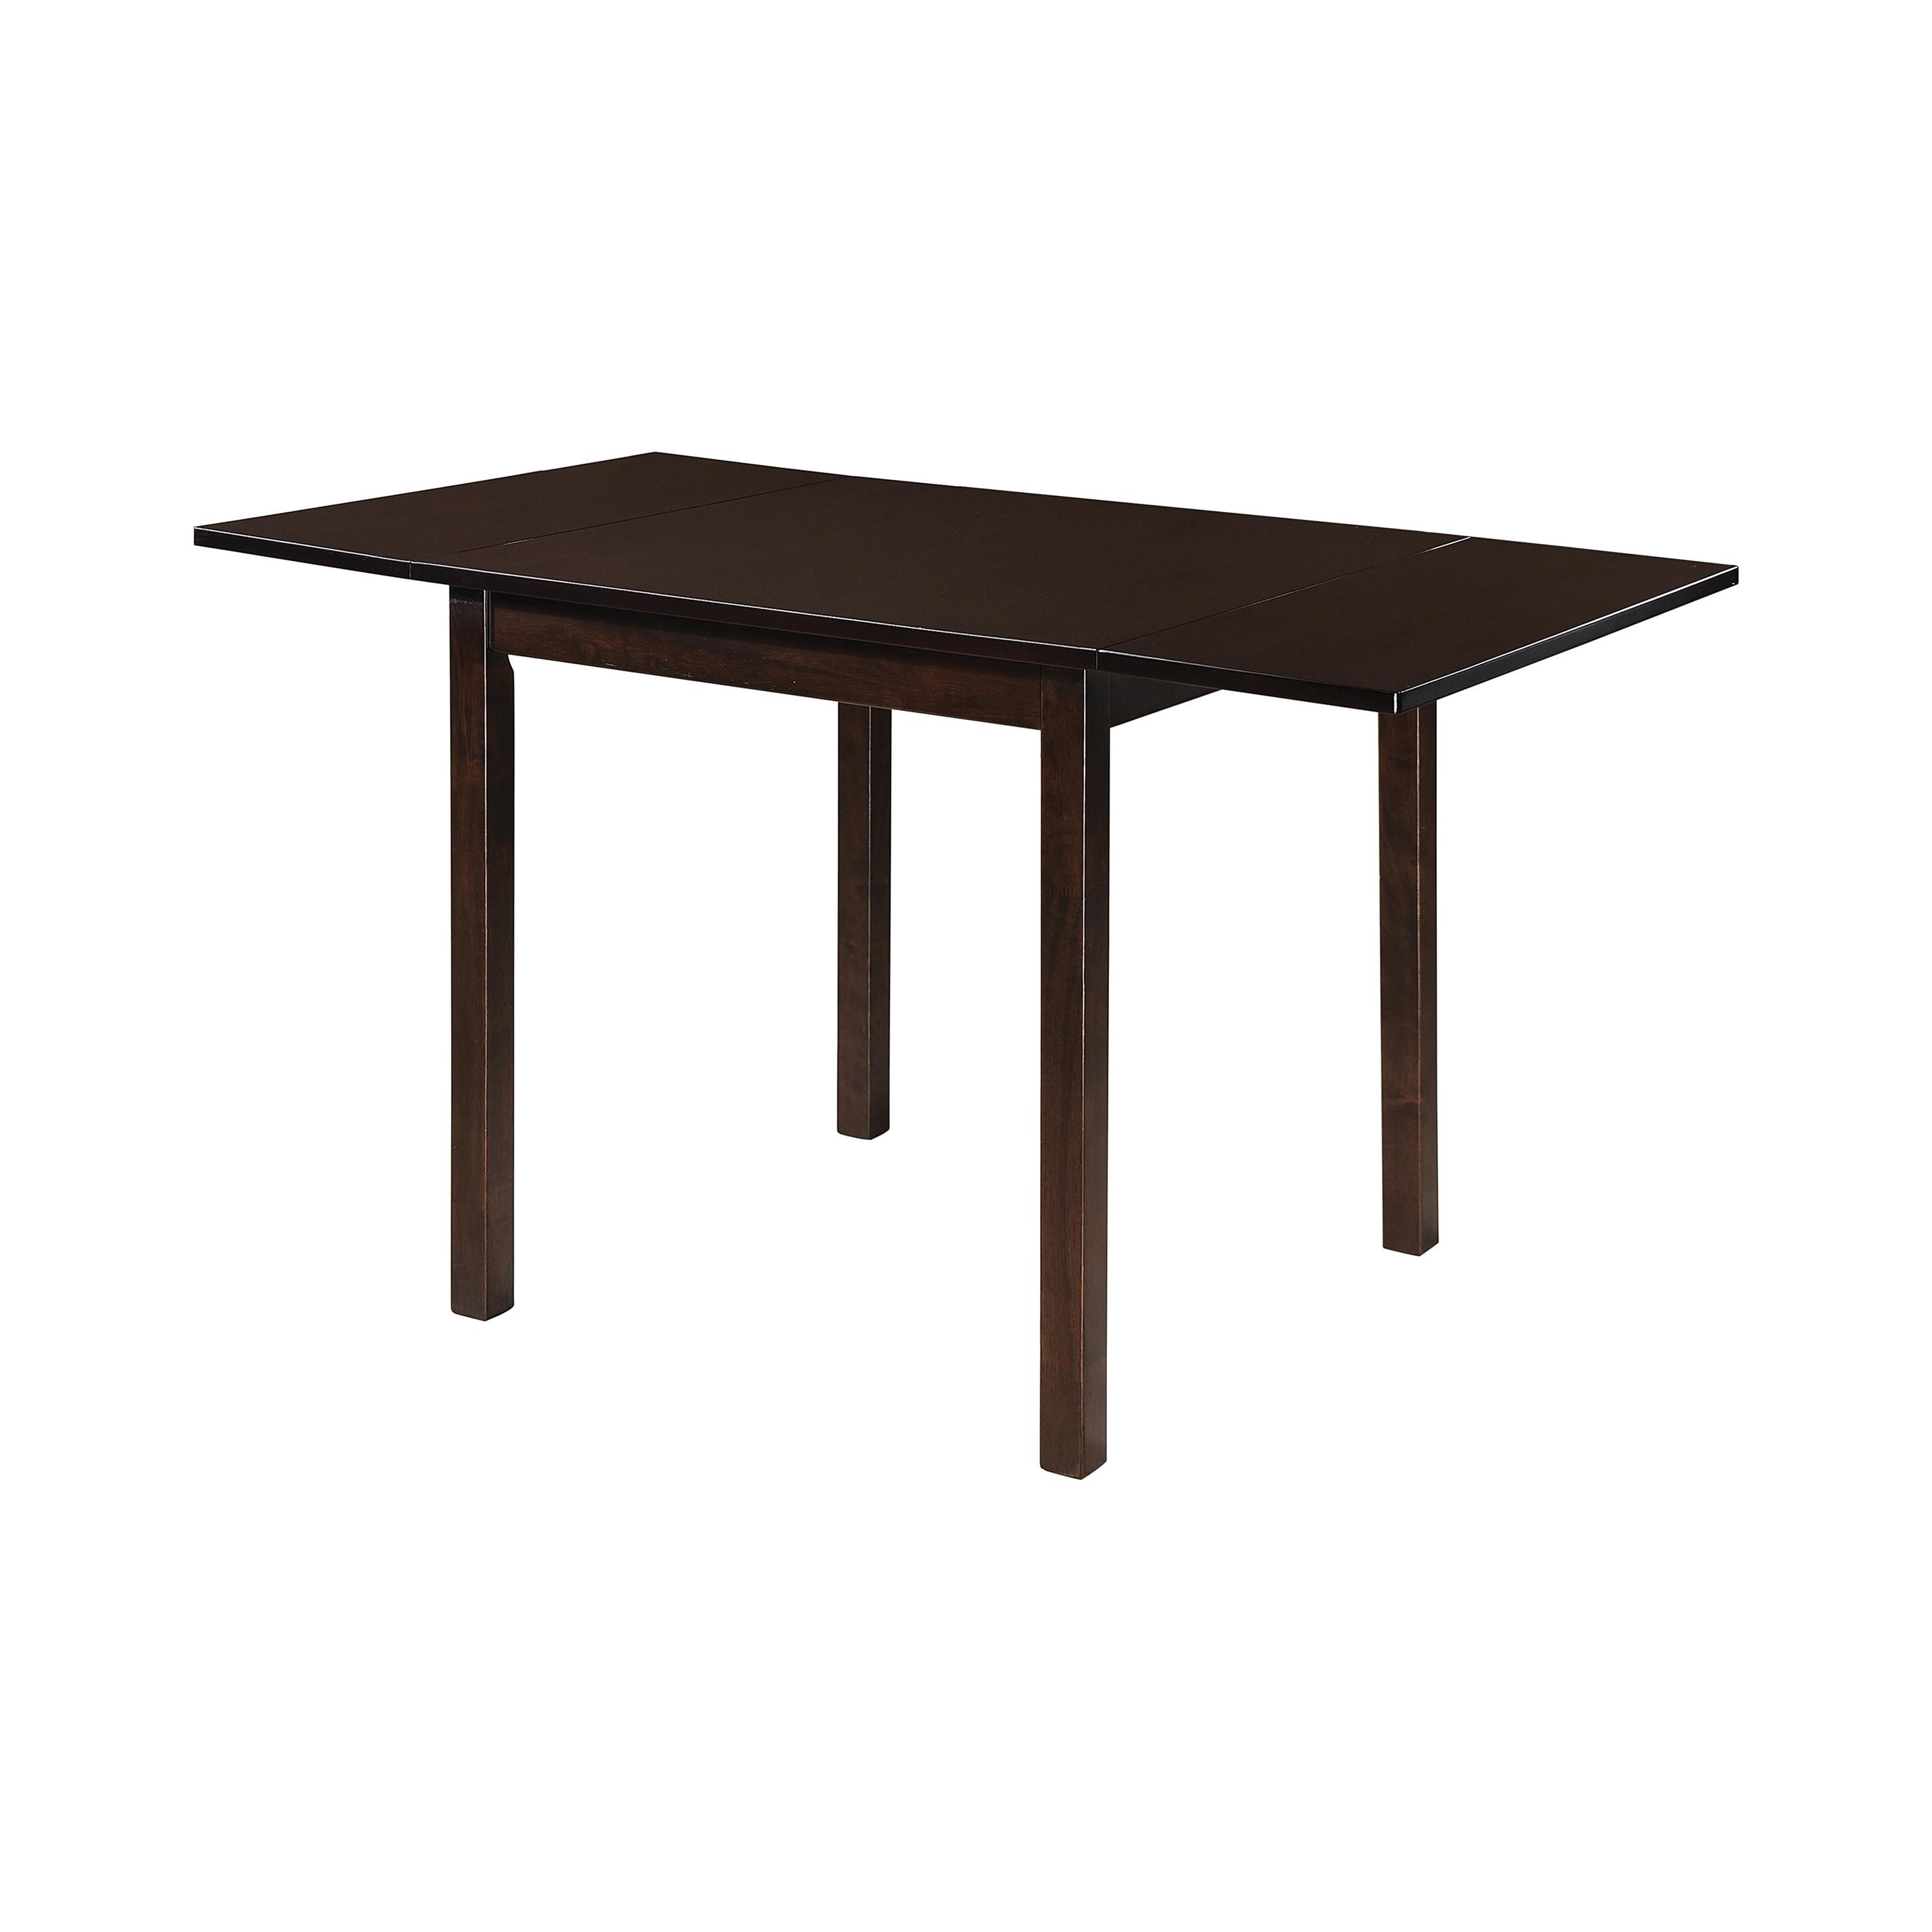 Transitional Dining Table 190821 Kelso 190821 in Cappuccino 